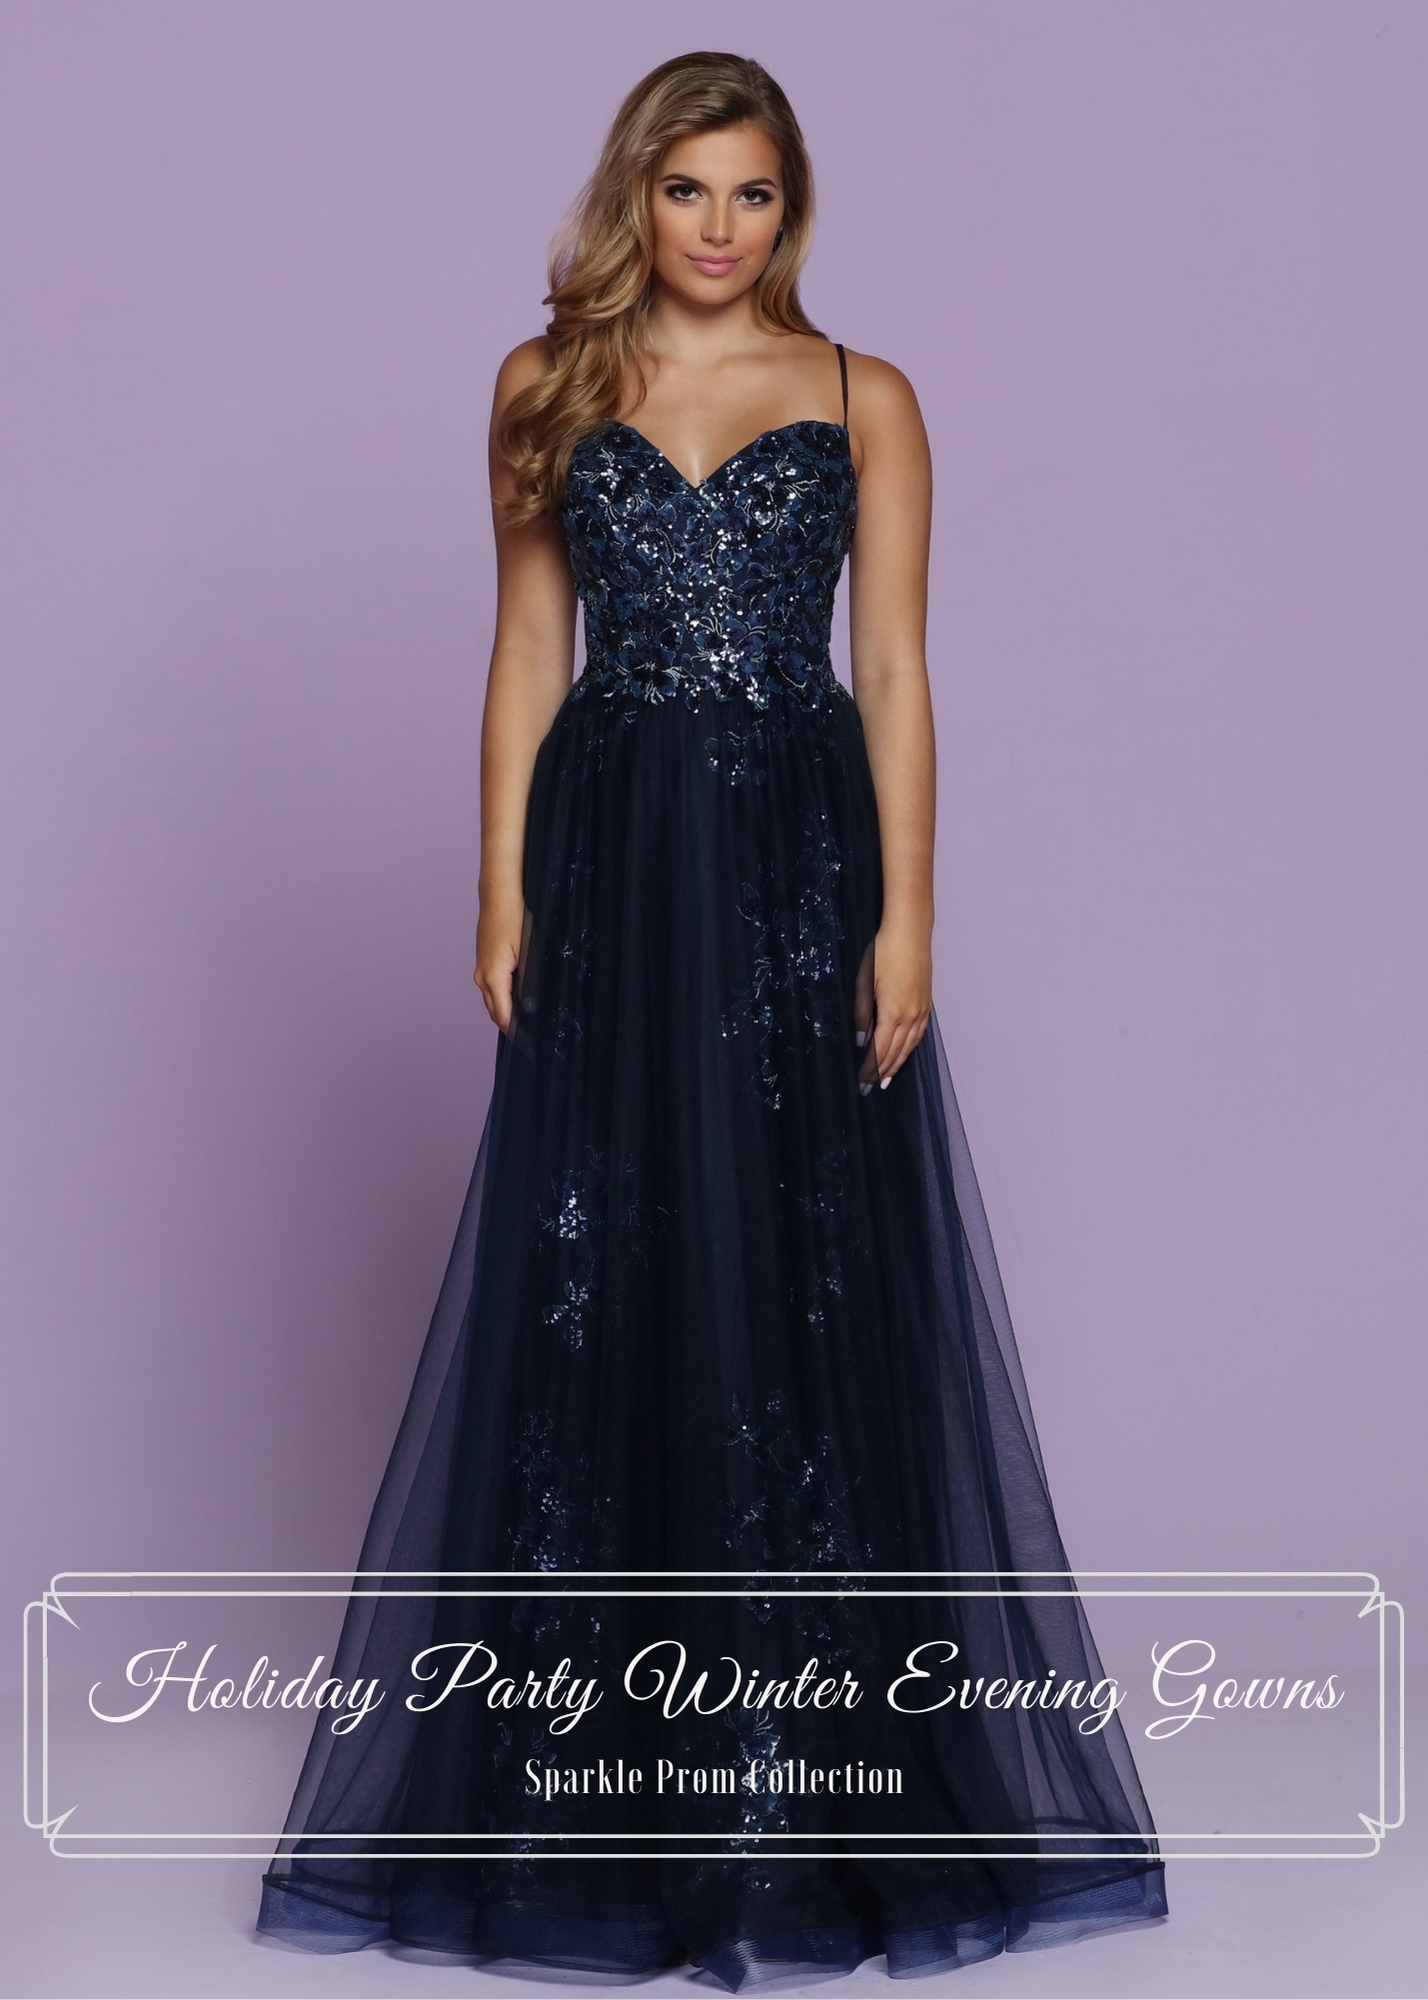 Holiday Party Dresses & Winter Evening Gowns – Sparkle Prom